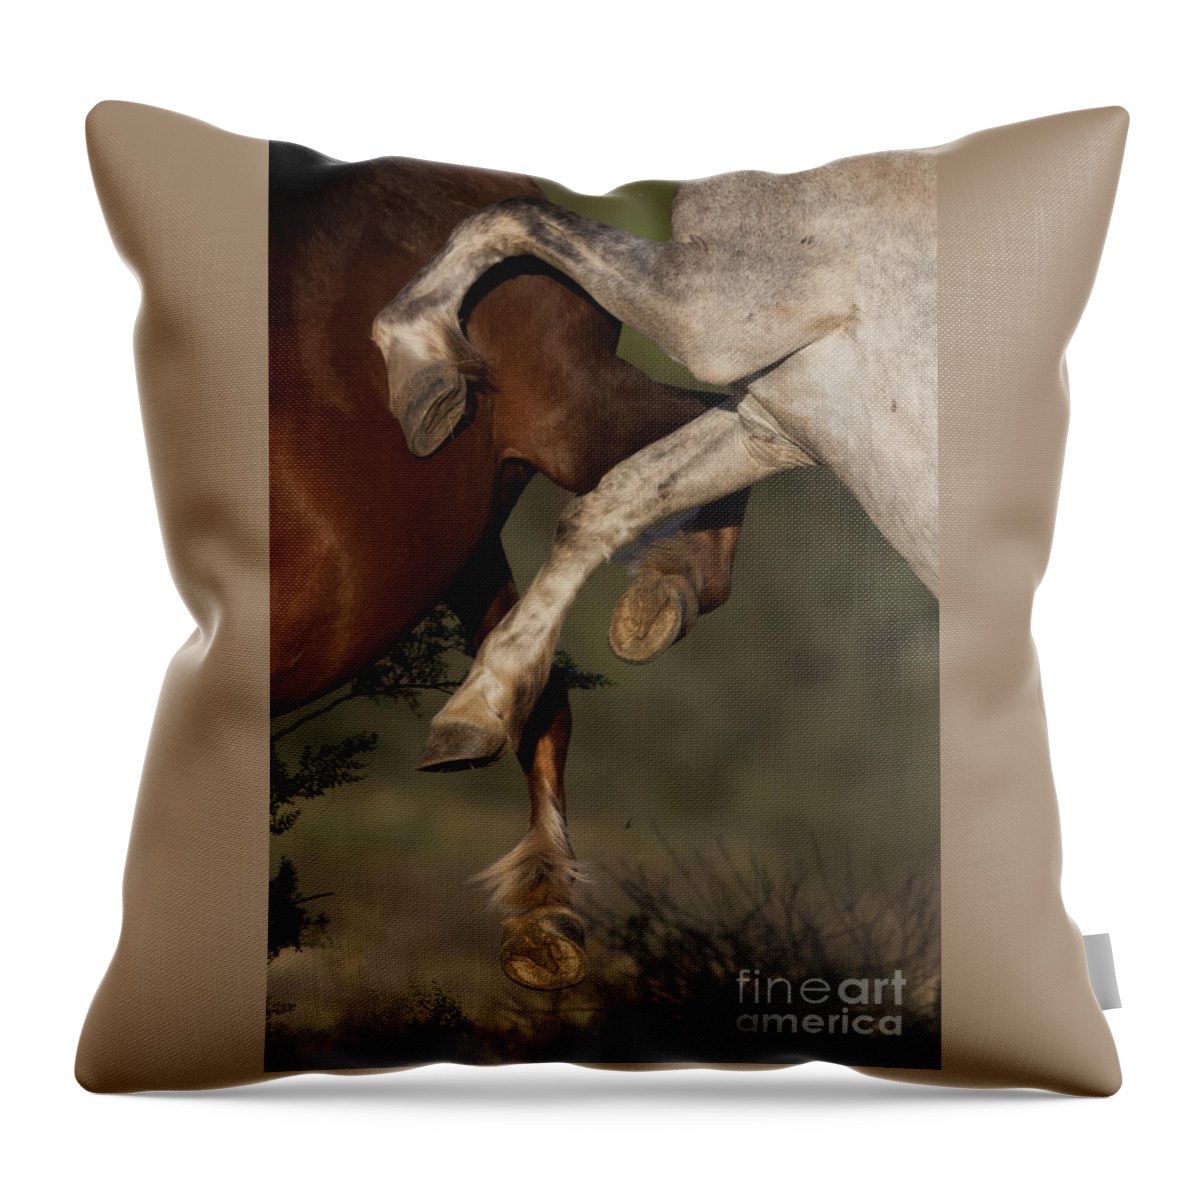 Action Throw Pillow featuring the photograph Horse Ballet by Shannon Hastings